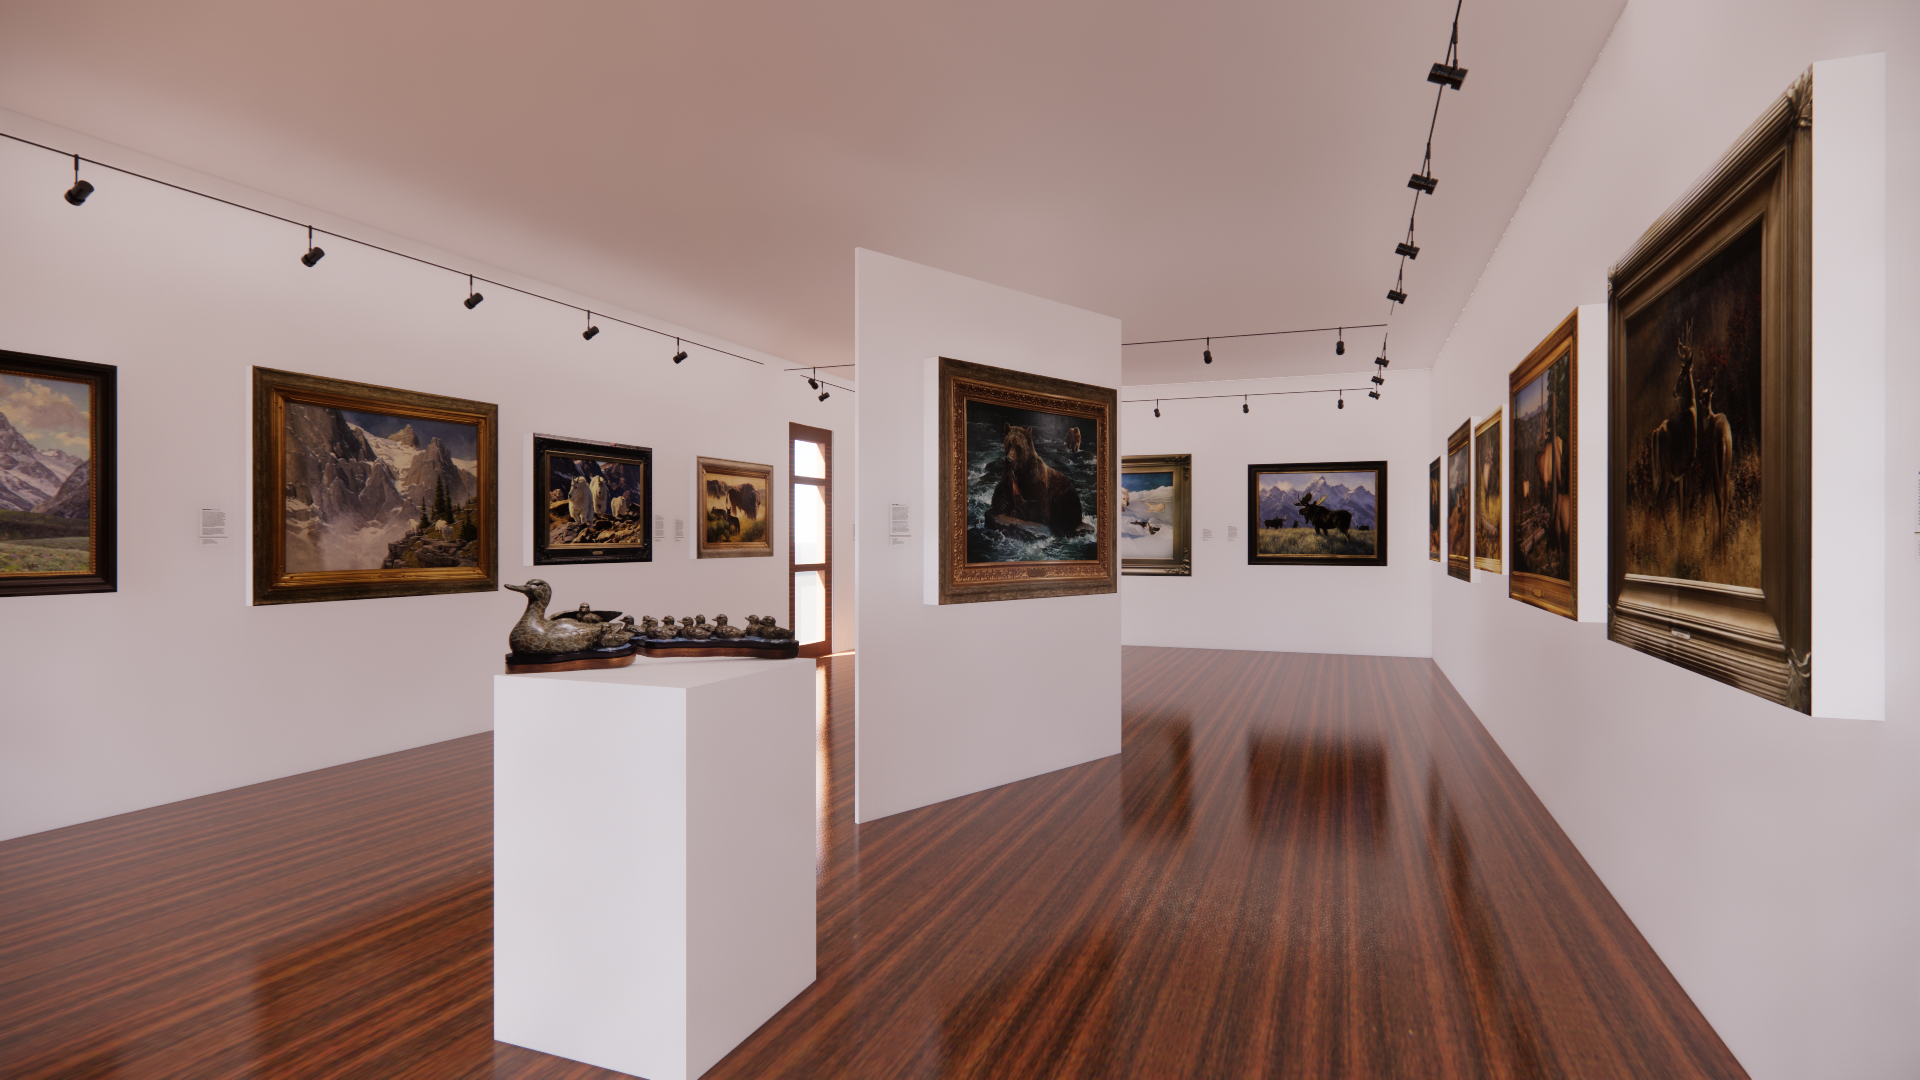 Virtual exhibition Installation View, center of Gallery, Selections from the Don B. Huntley Collection: The Life & Terrain of the Wild West Exhibition, Oct 17, 2022 to Feb 16, 2023   